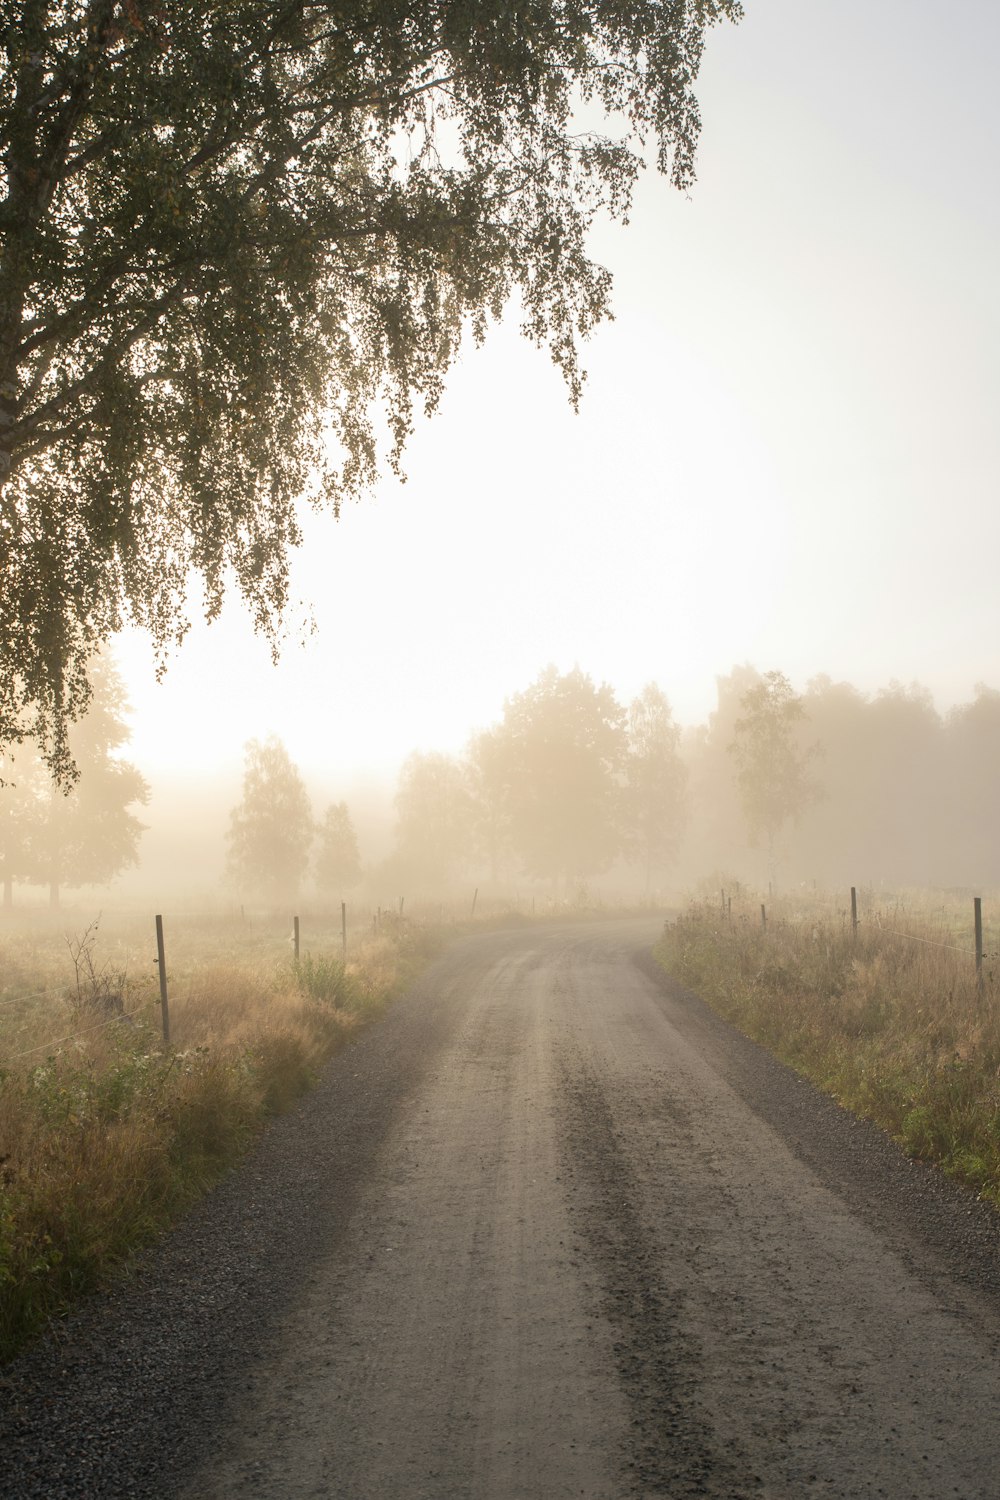 a foggy country road with a tree in the foreground